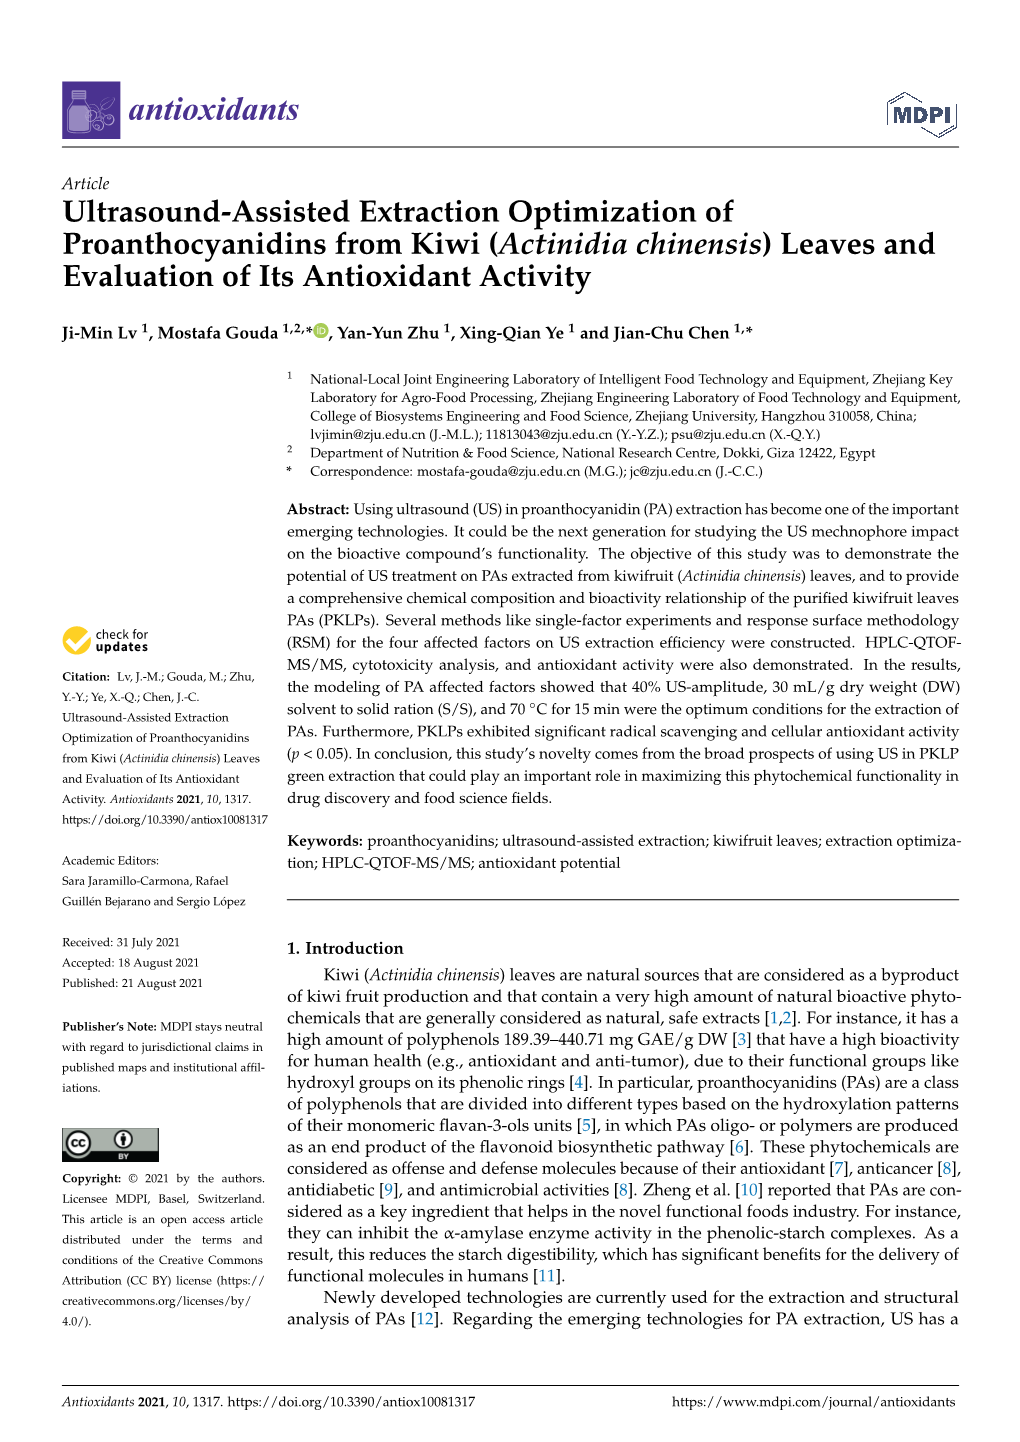 Ultrasound-Assisted Extraction Optimization of Proanthocyanidins from Kiwi (Actinidia Chinensis) Leaves and Evaluation of Its Antioxidant Activity